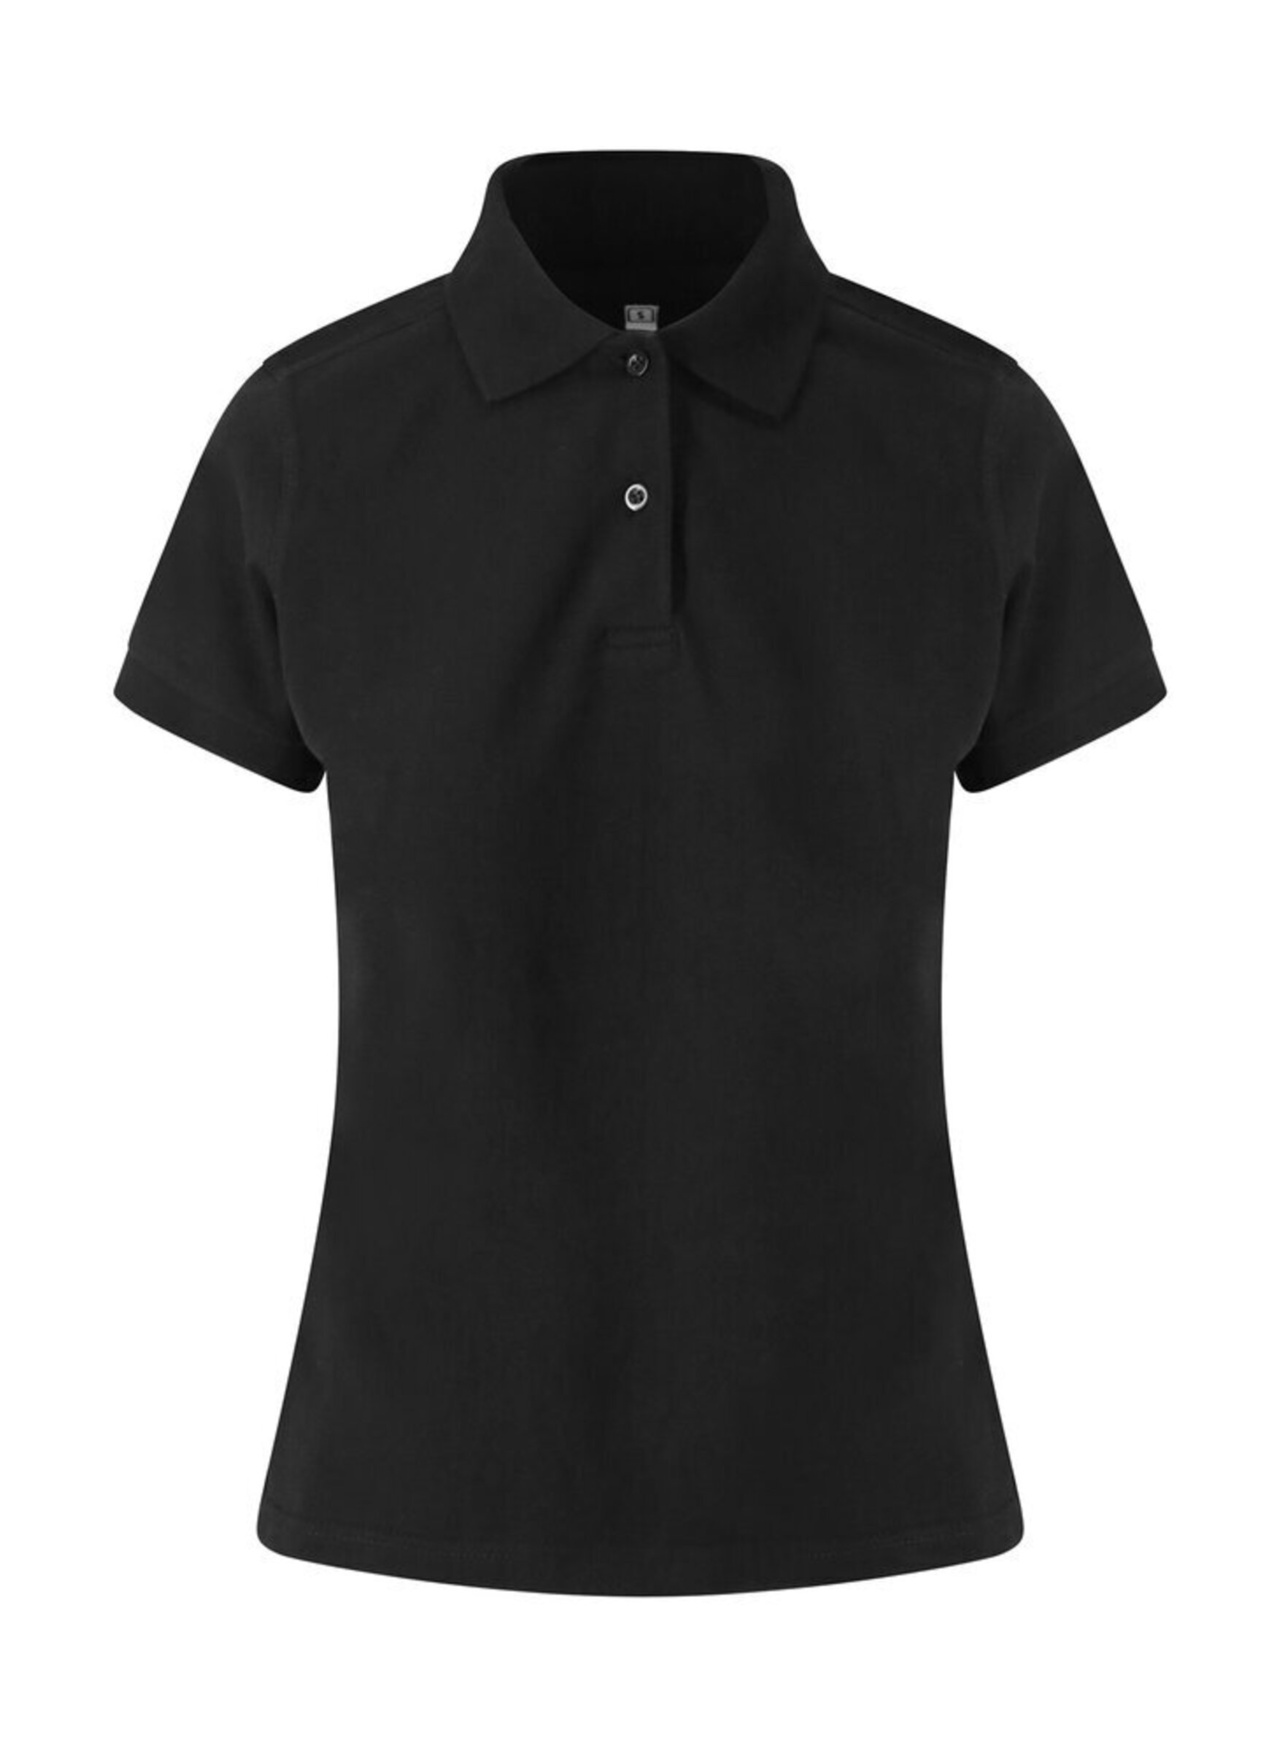 Just Polos Women's Stretch Polo - Black - S